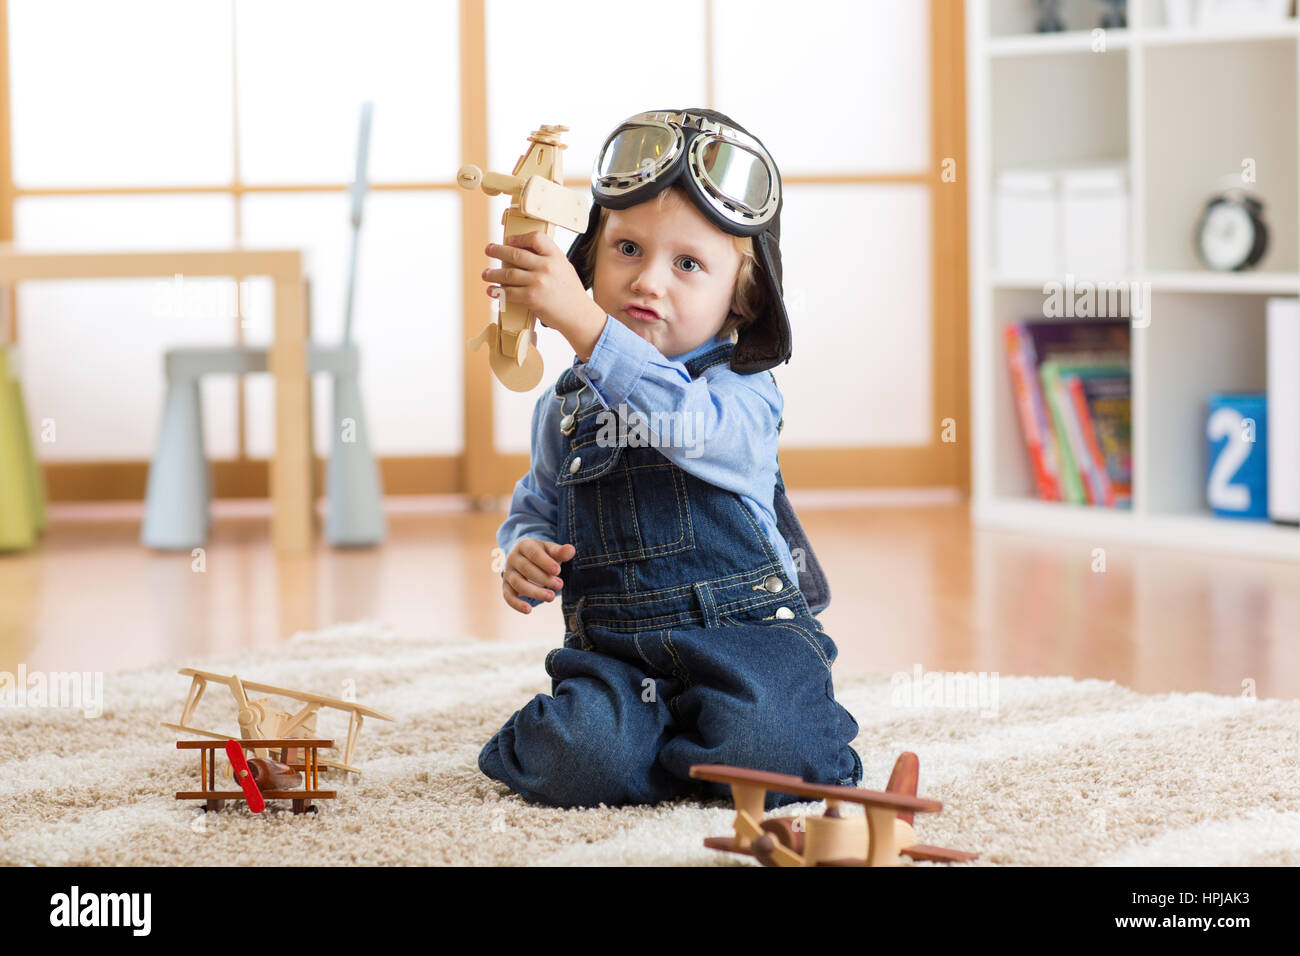 Pilot aviator child plays with wooden toy airplanes on floor in his room Stock Photo